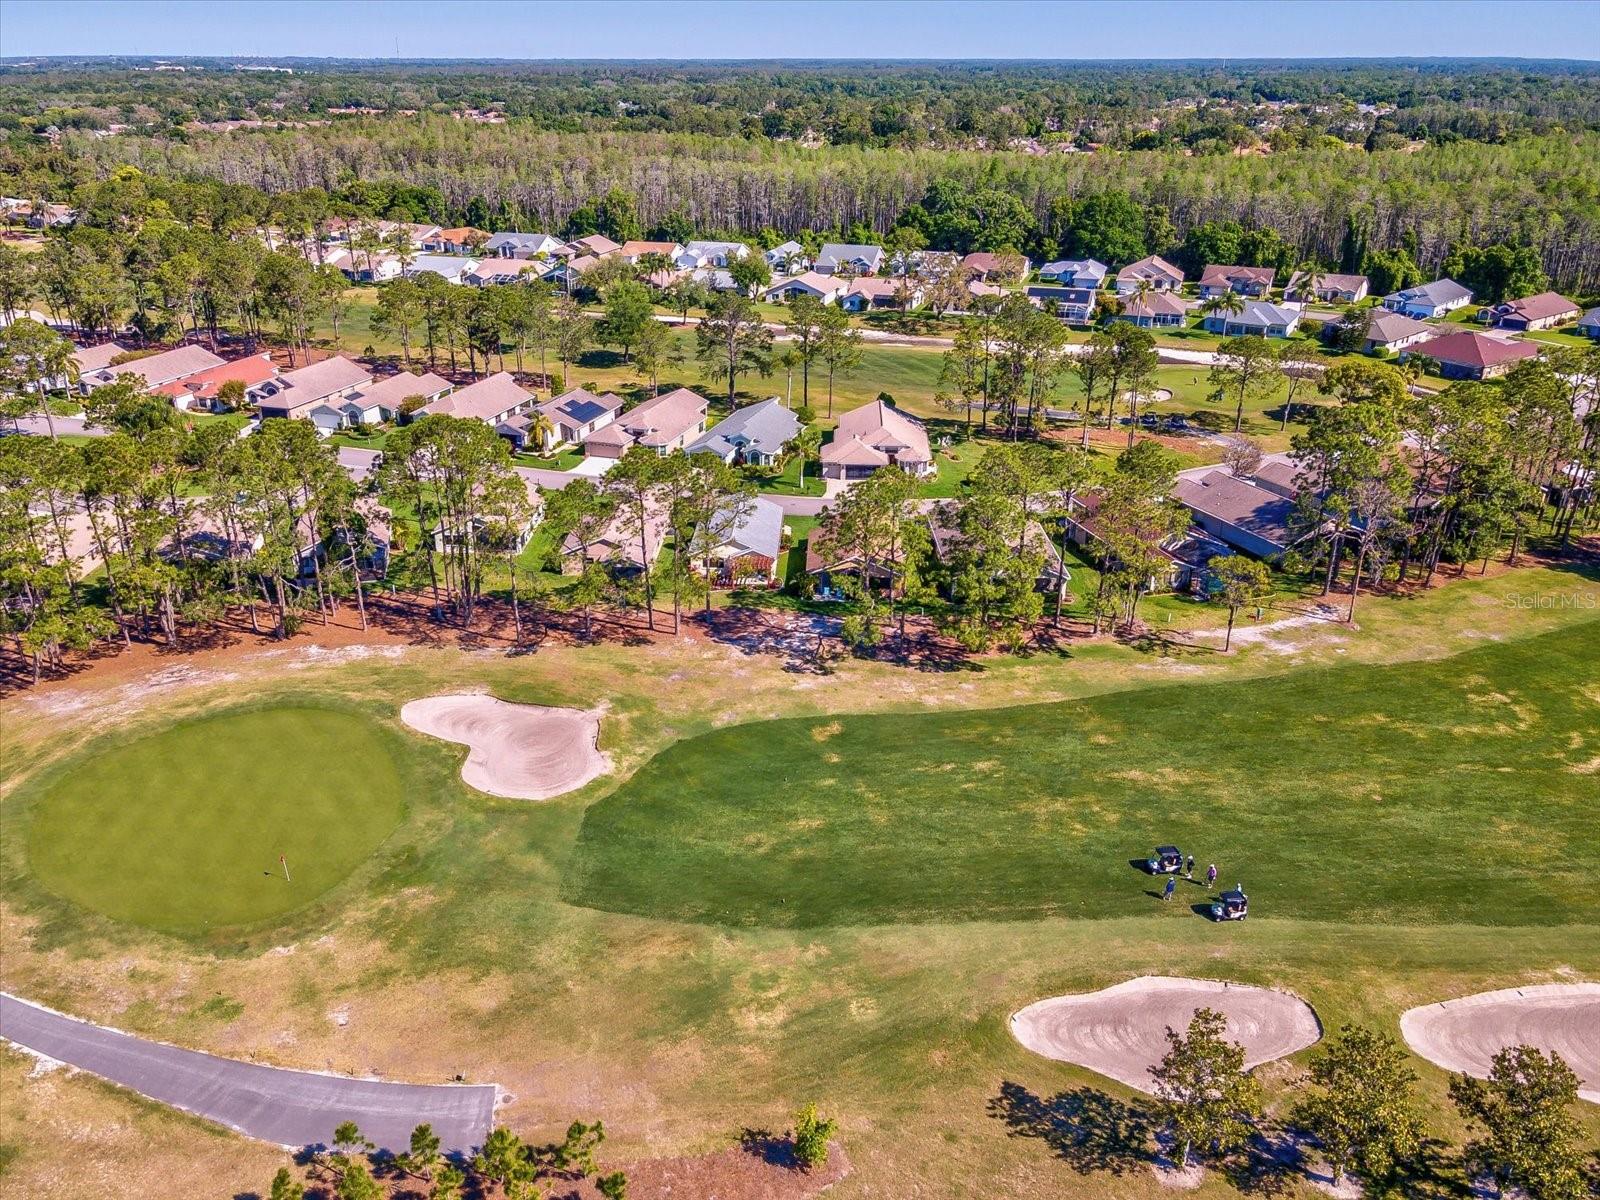 Drone views of 15th fairway and green